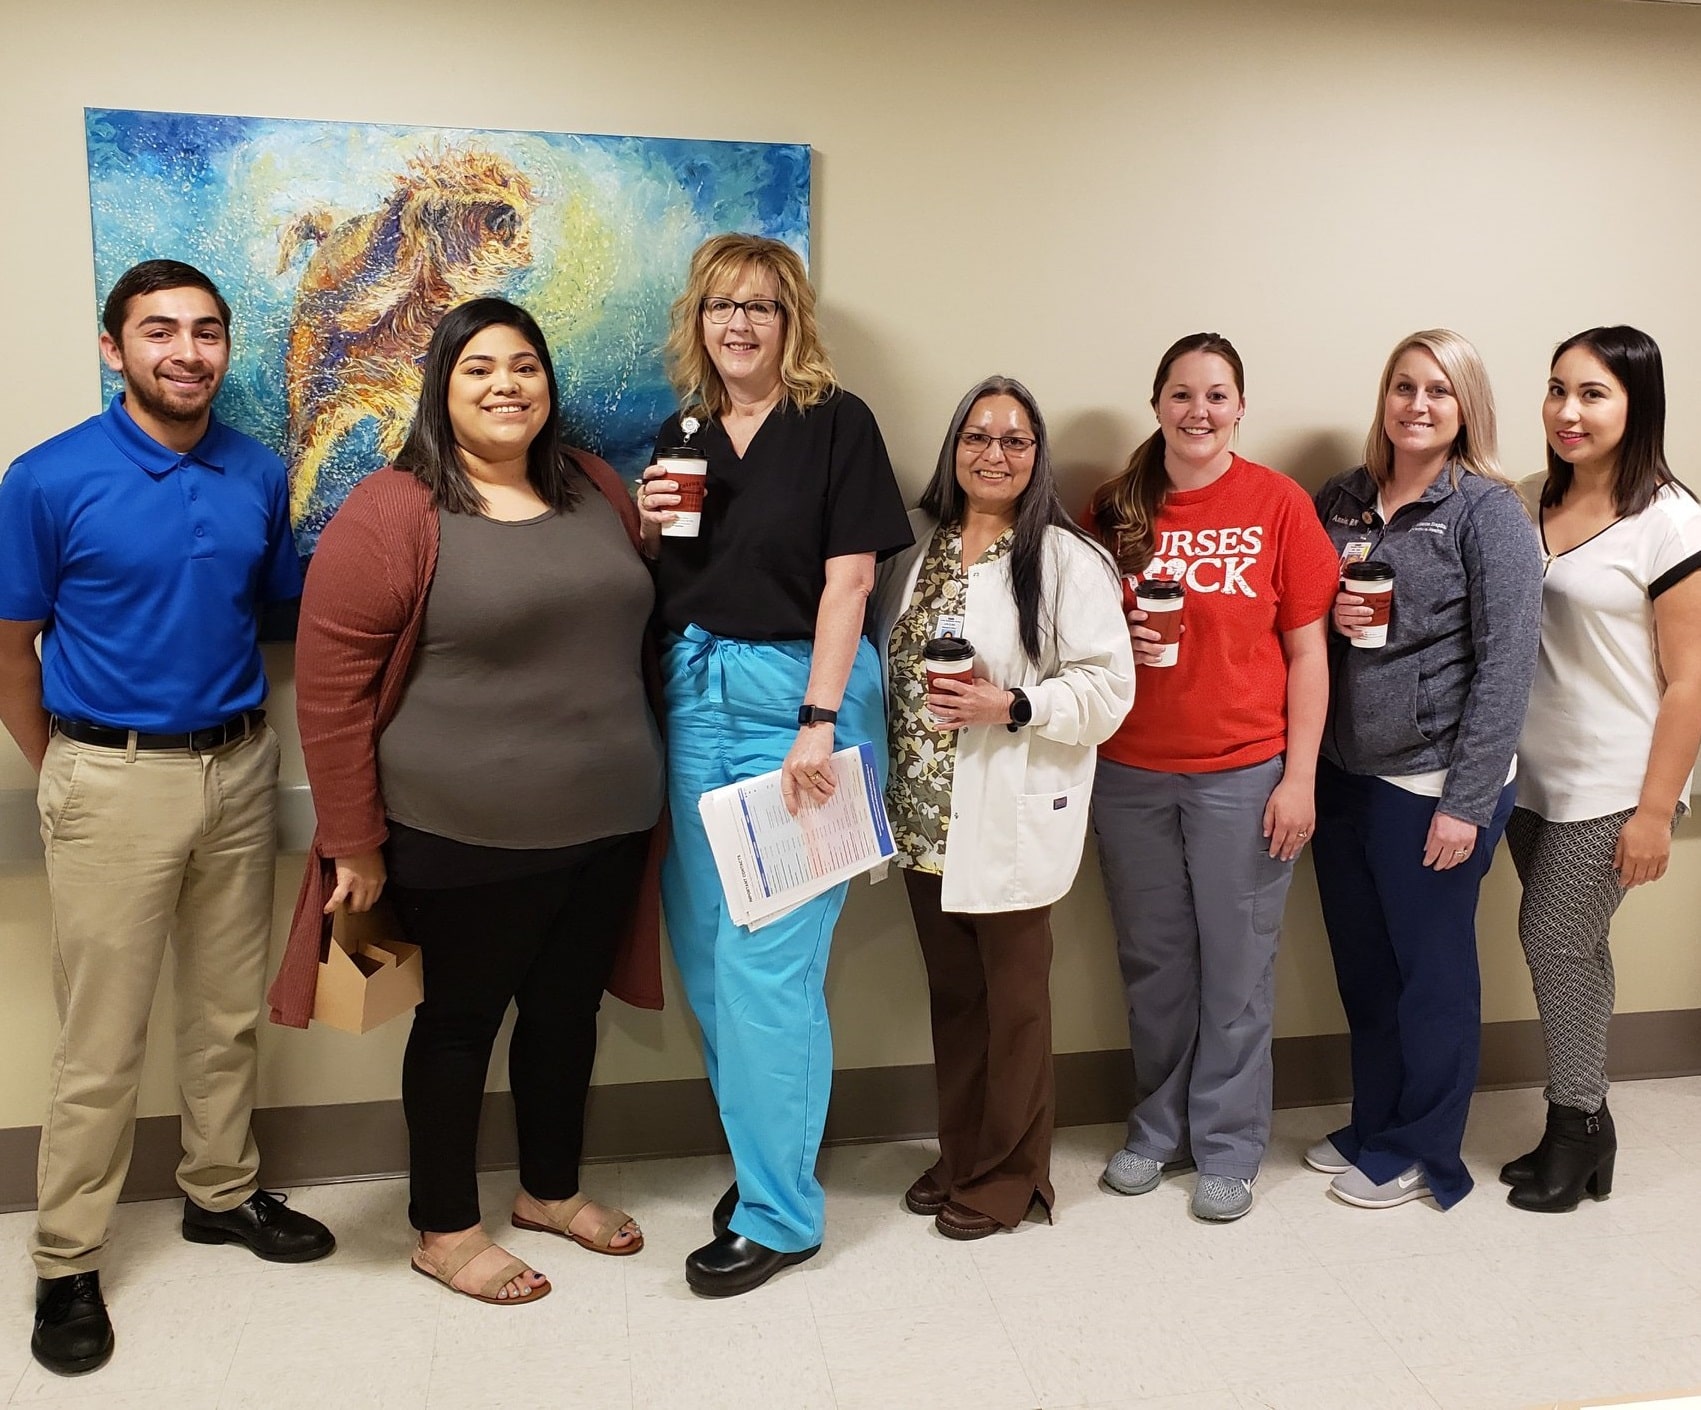 Garden City staff pictured with St. Catherine nurses.